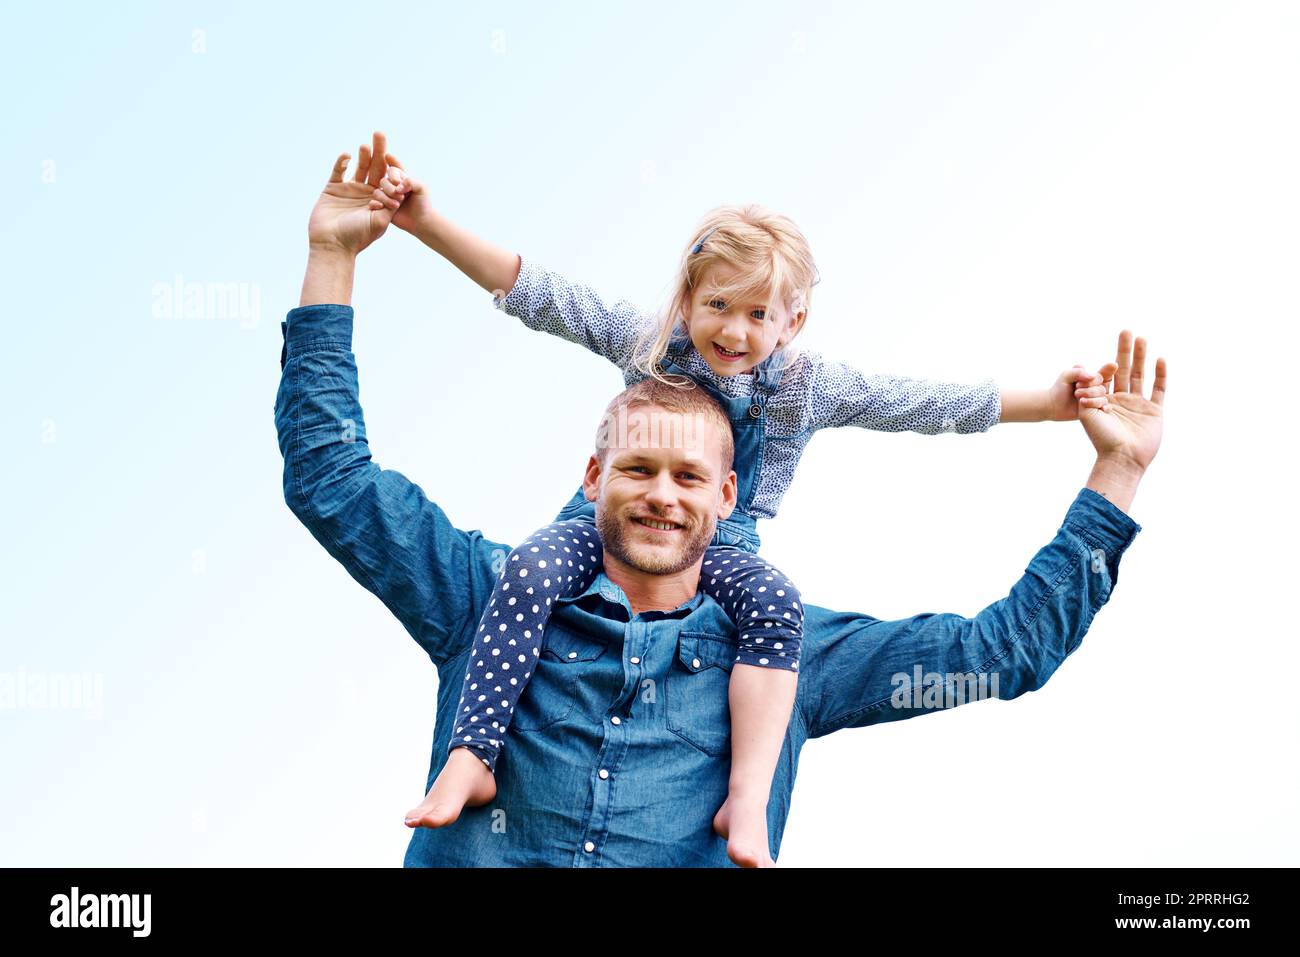 Riding high with Dad. Portrait of a happy dad carrying his young daughter on his shoulders. Stock Photo